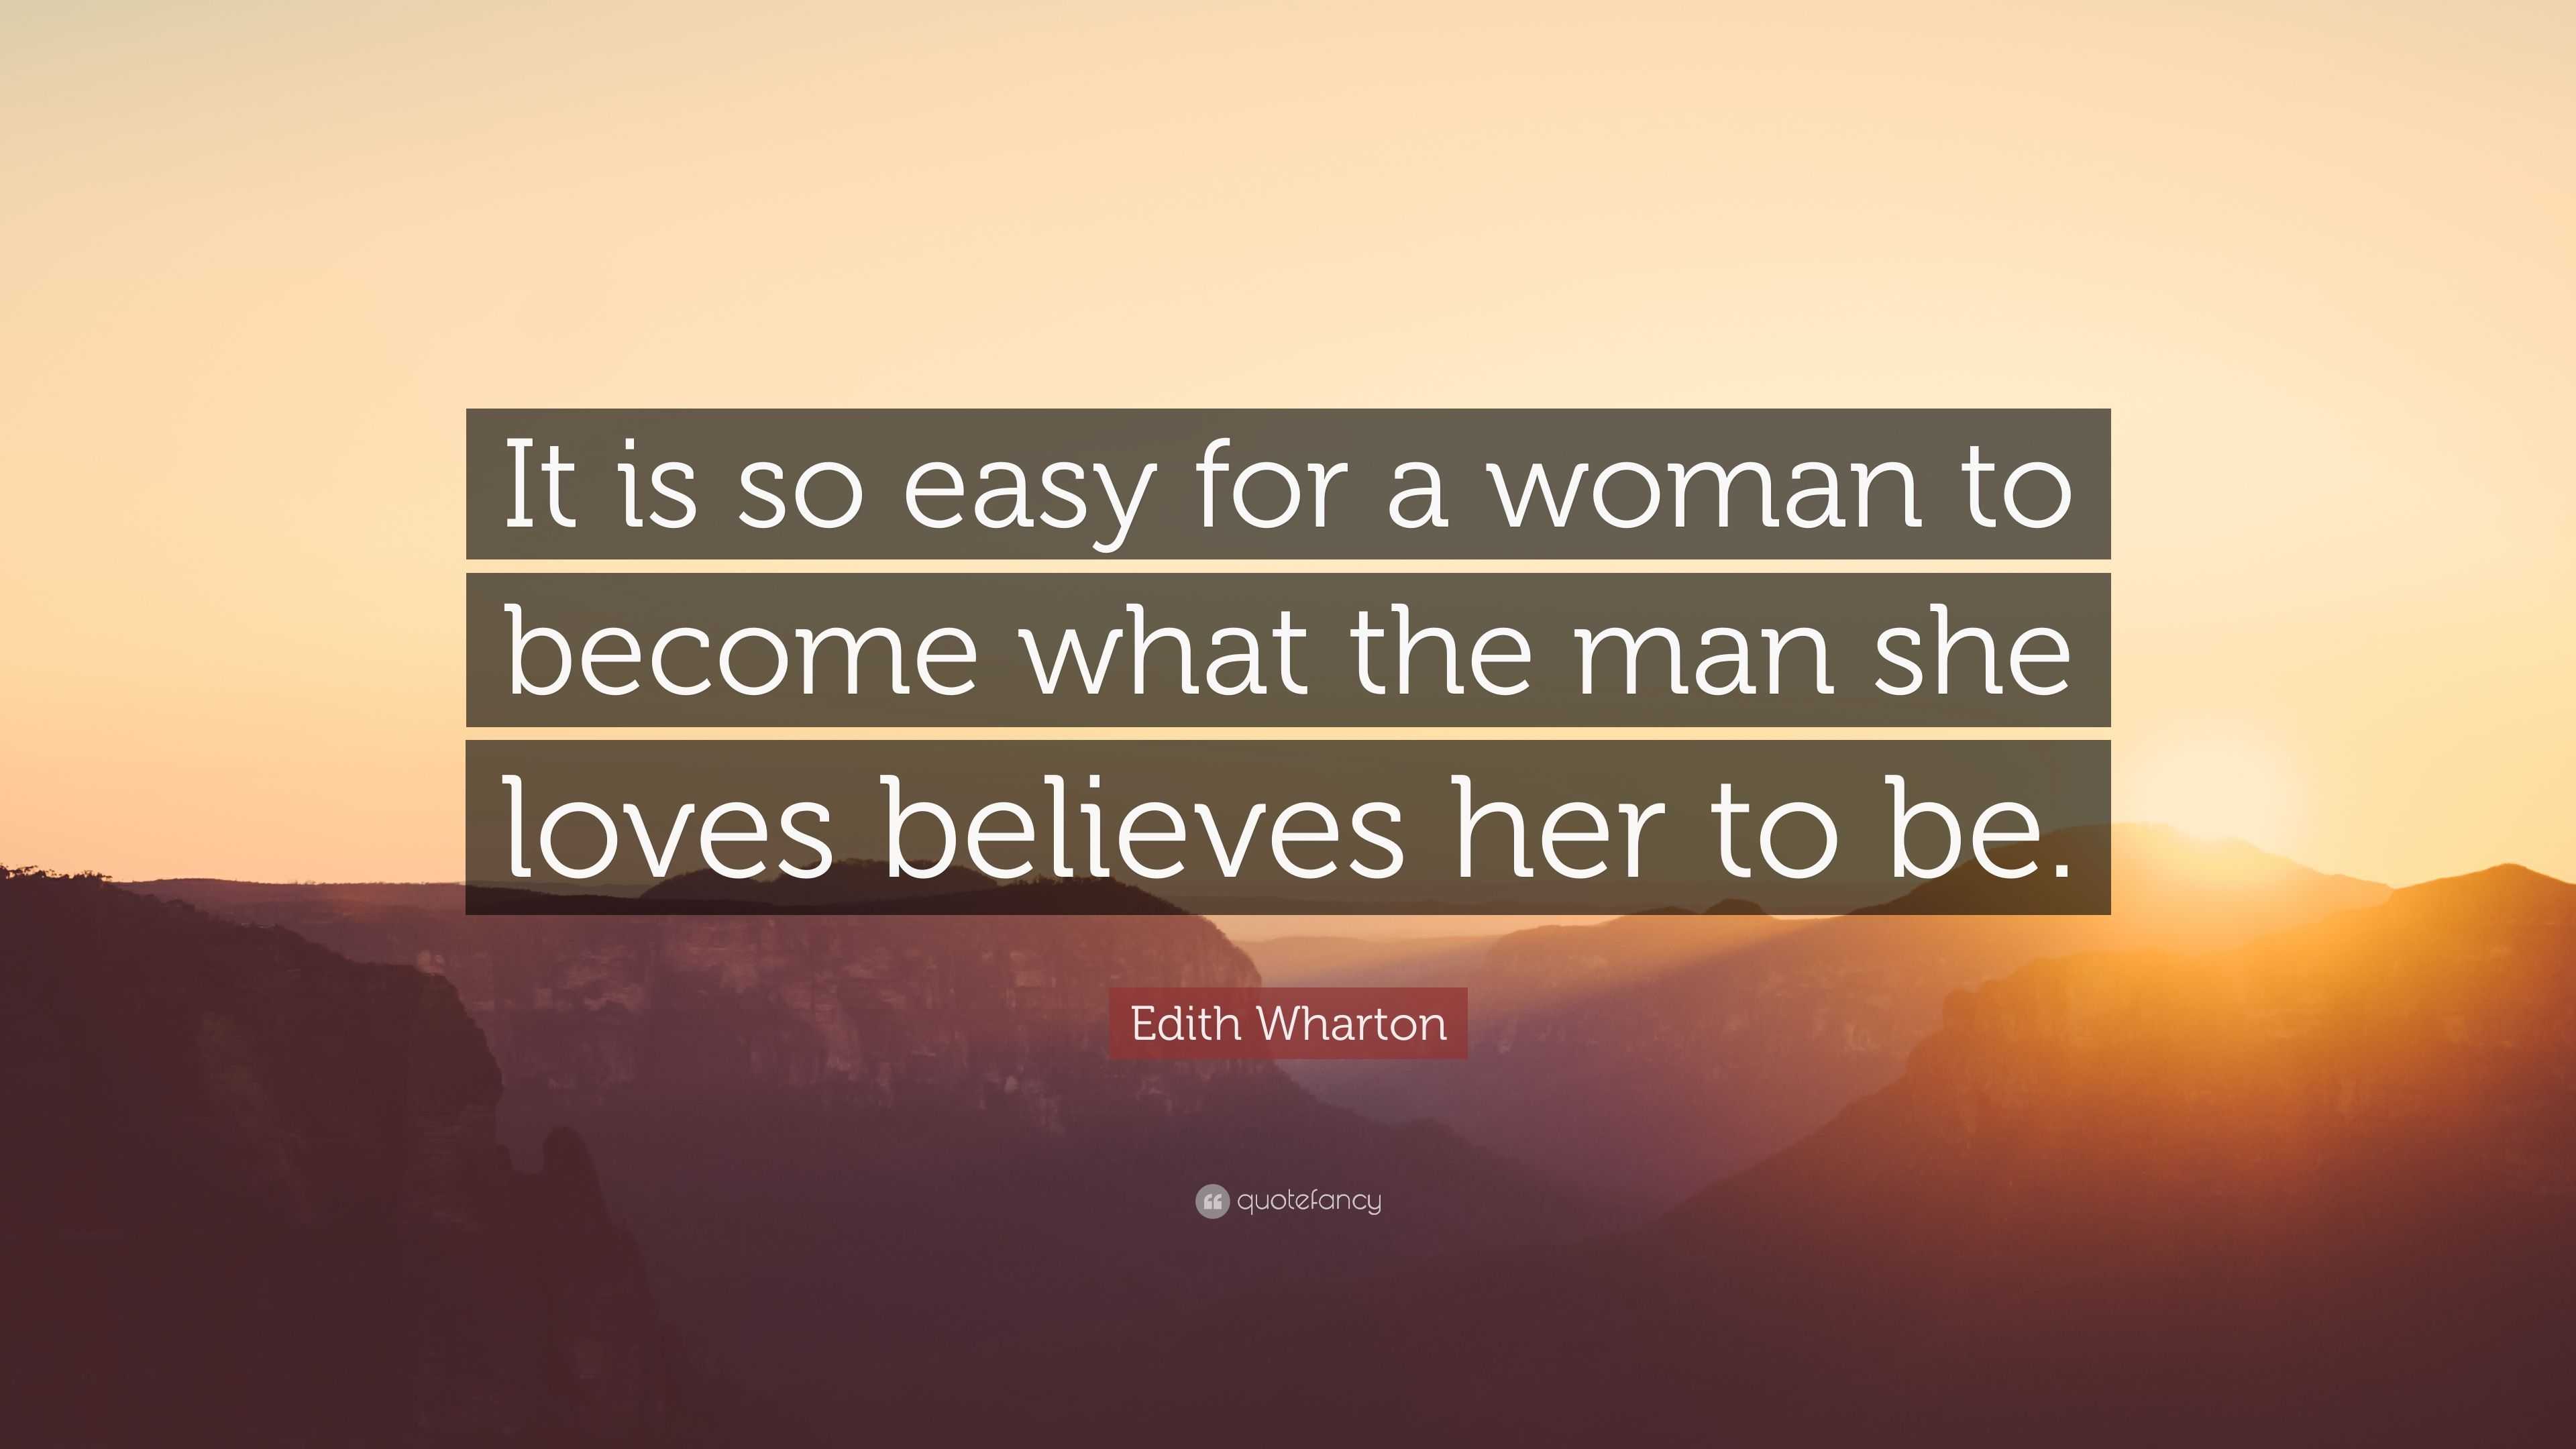 Edith Wharton Quote: “It is so easy for a woman to become what the man ...